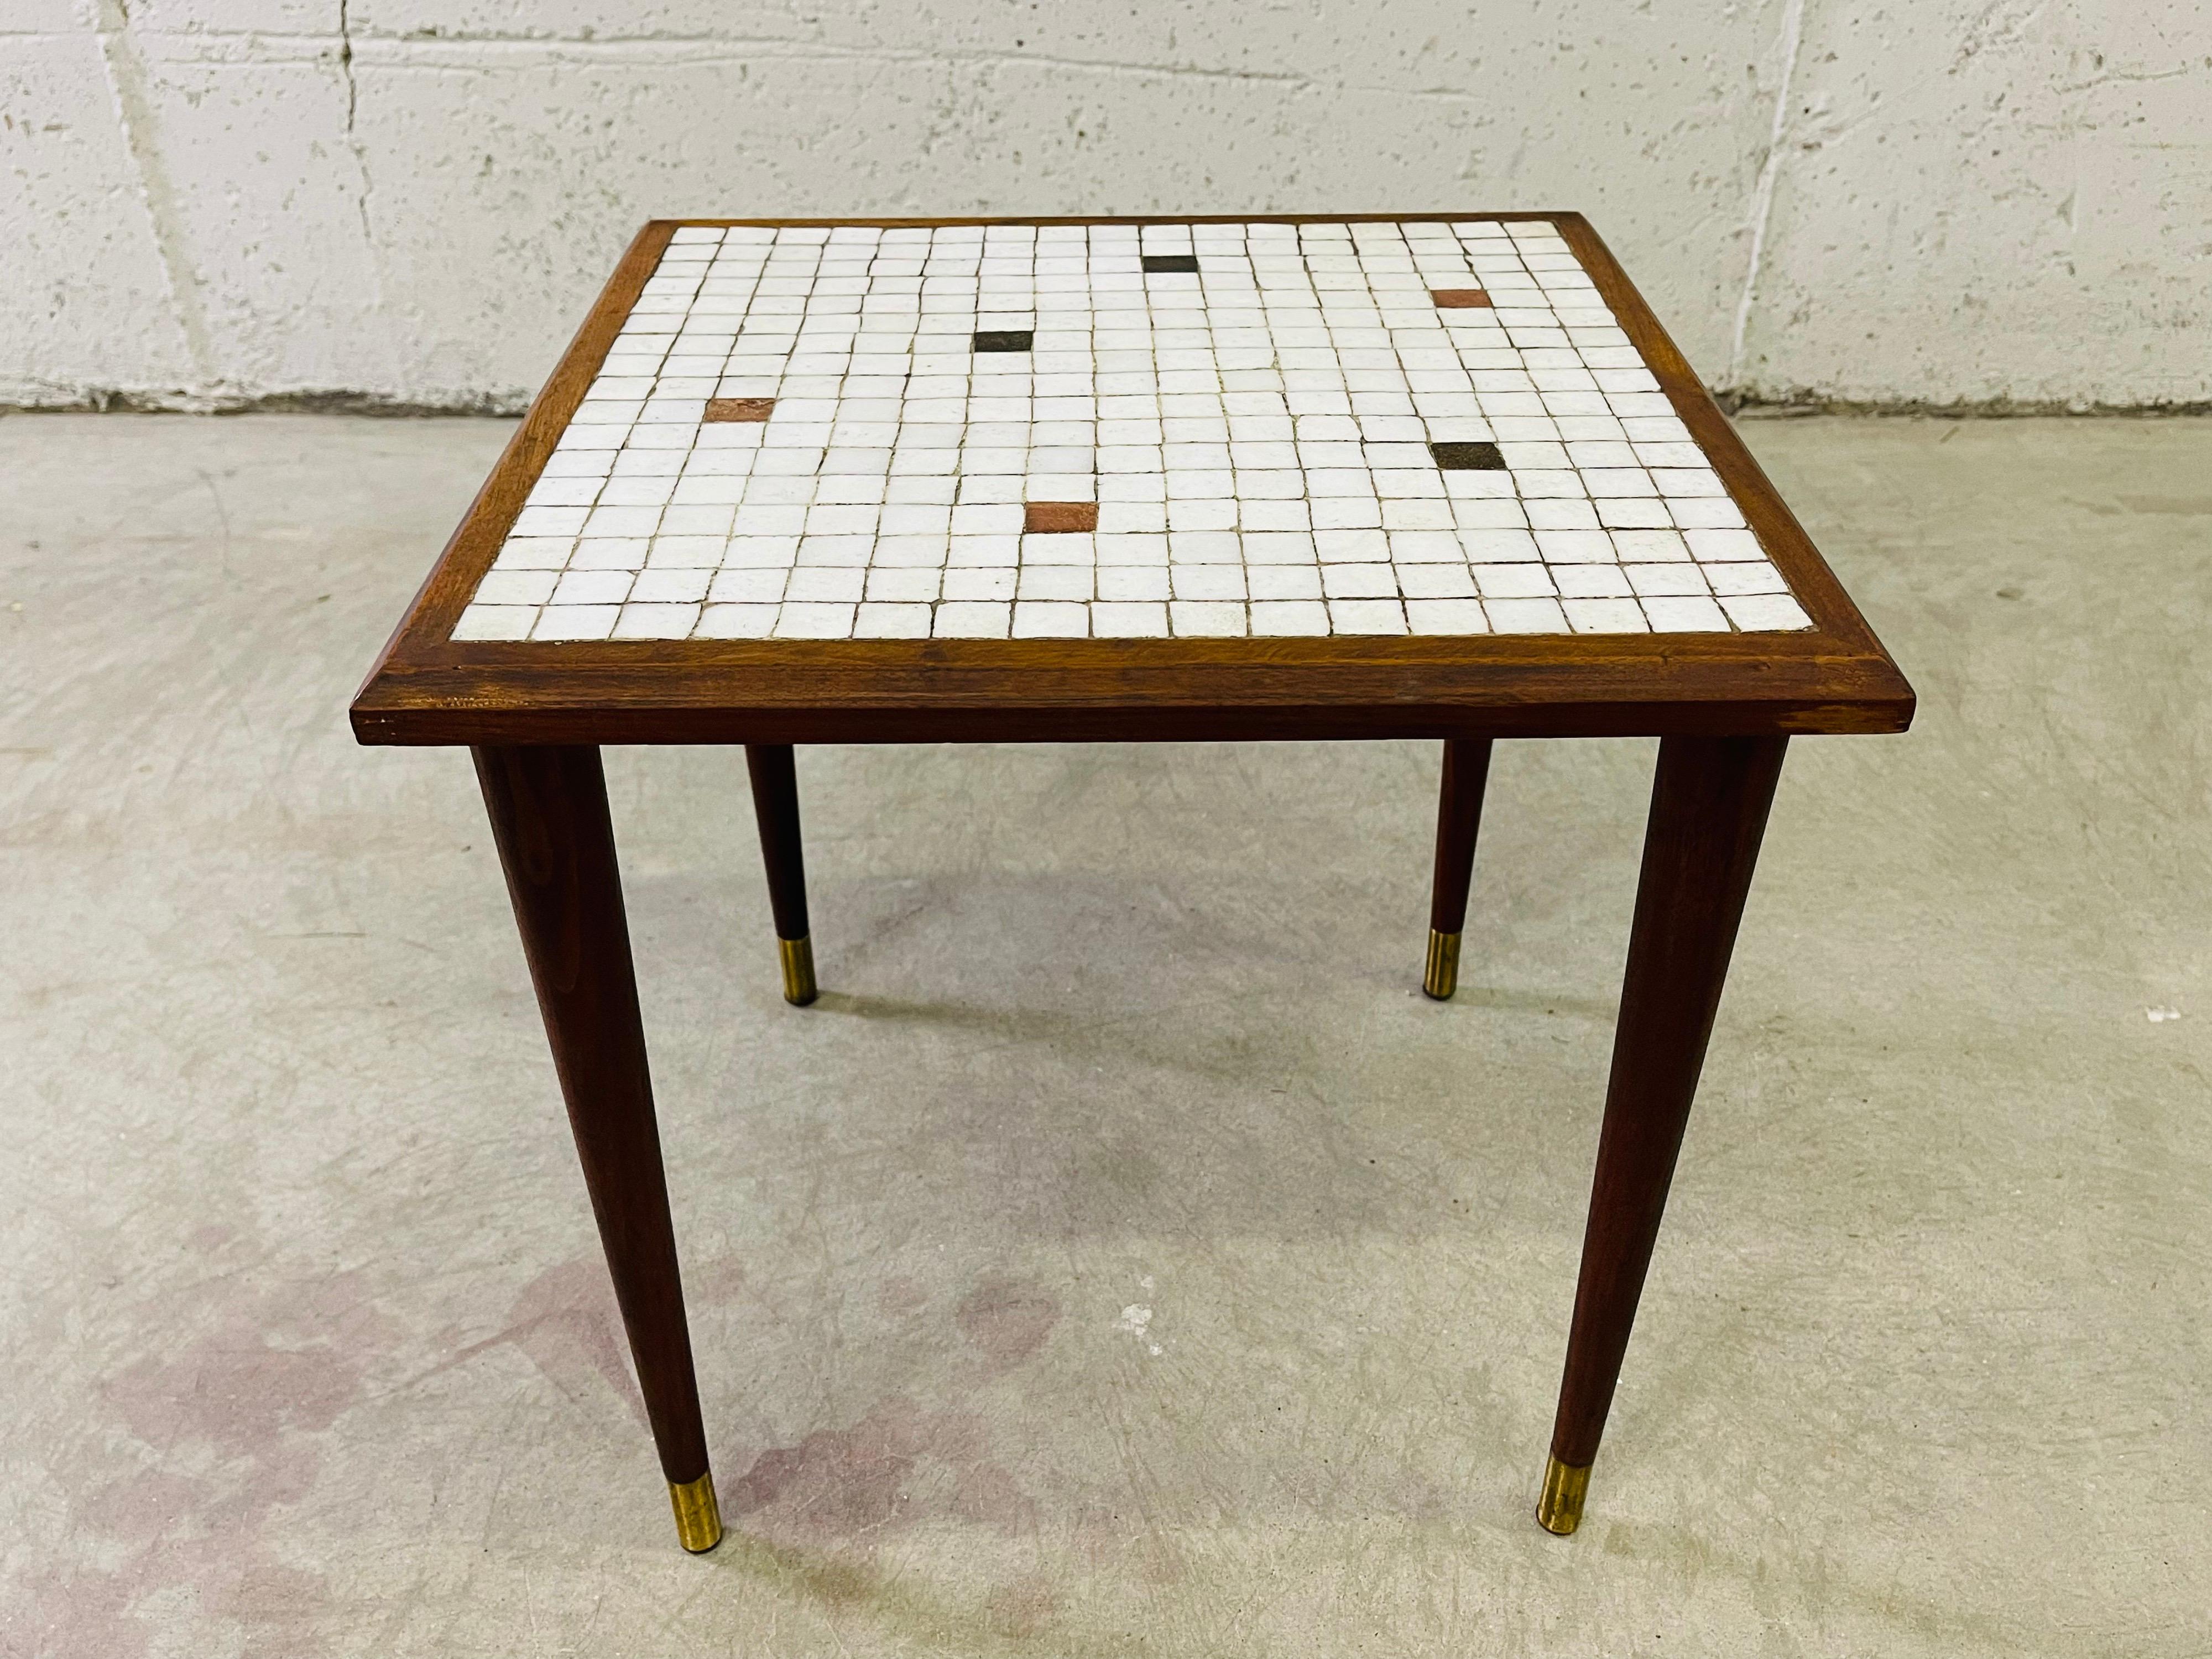 20th Century 1960s Small Square Tile Top Side Table